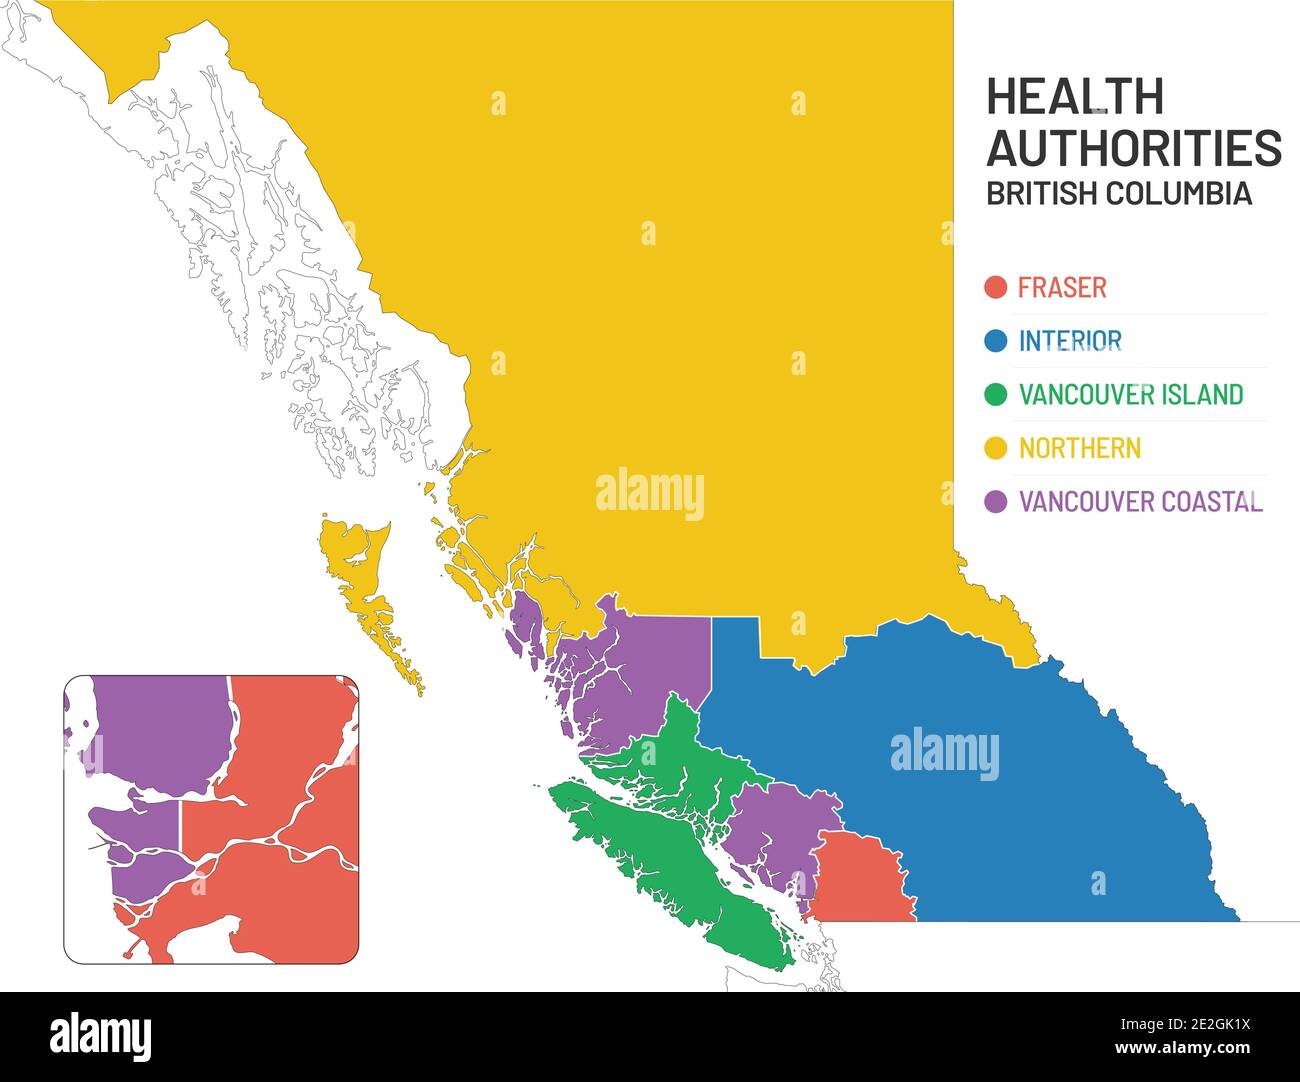 British Columbia Health Authorities Map Simple Map Of Bc Canada Illustrating And Naming The Health Boundary For Each Health Authority Region 2E2GK1X 